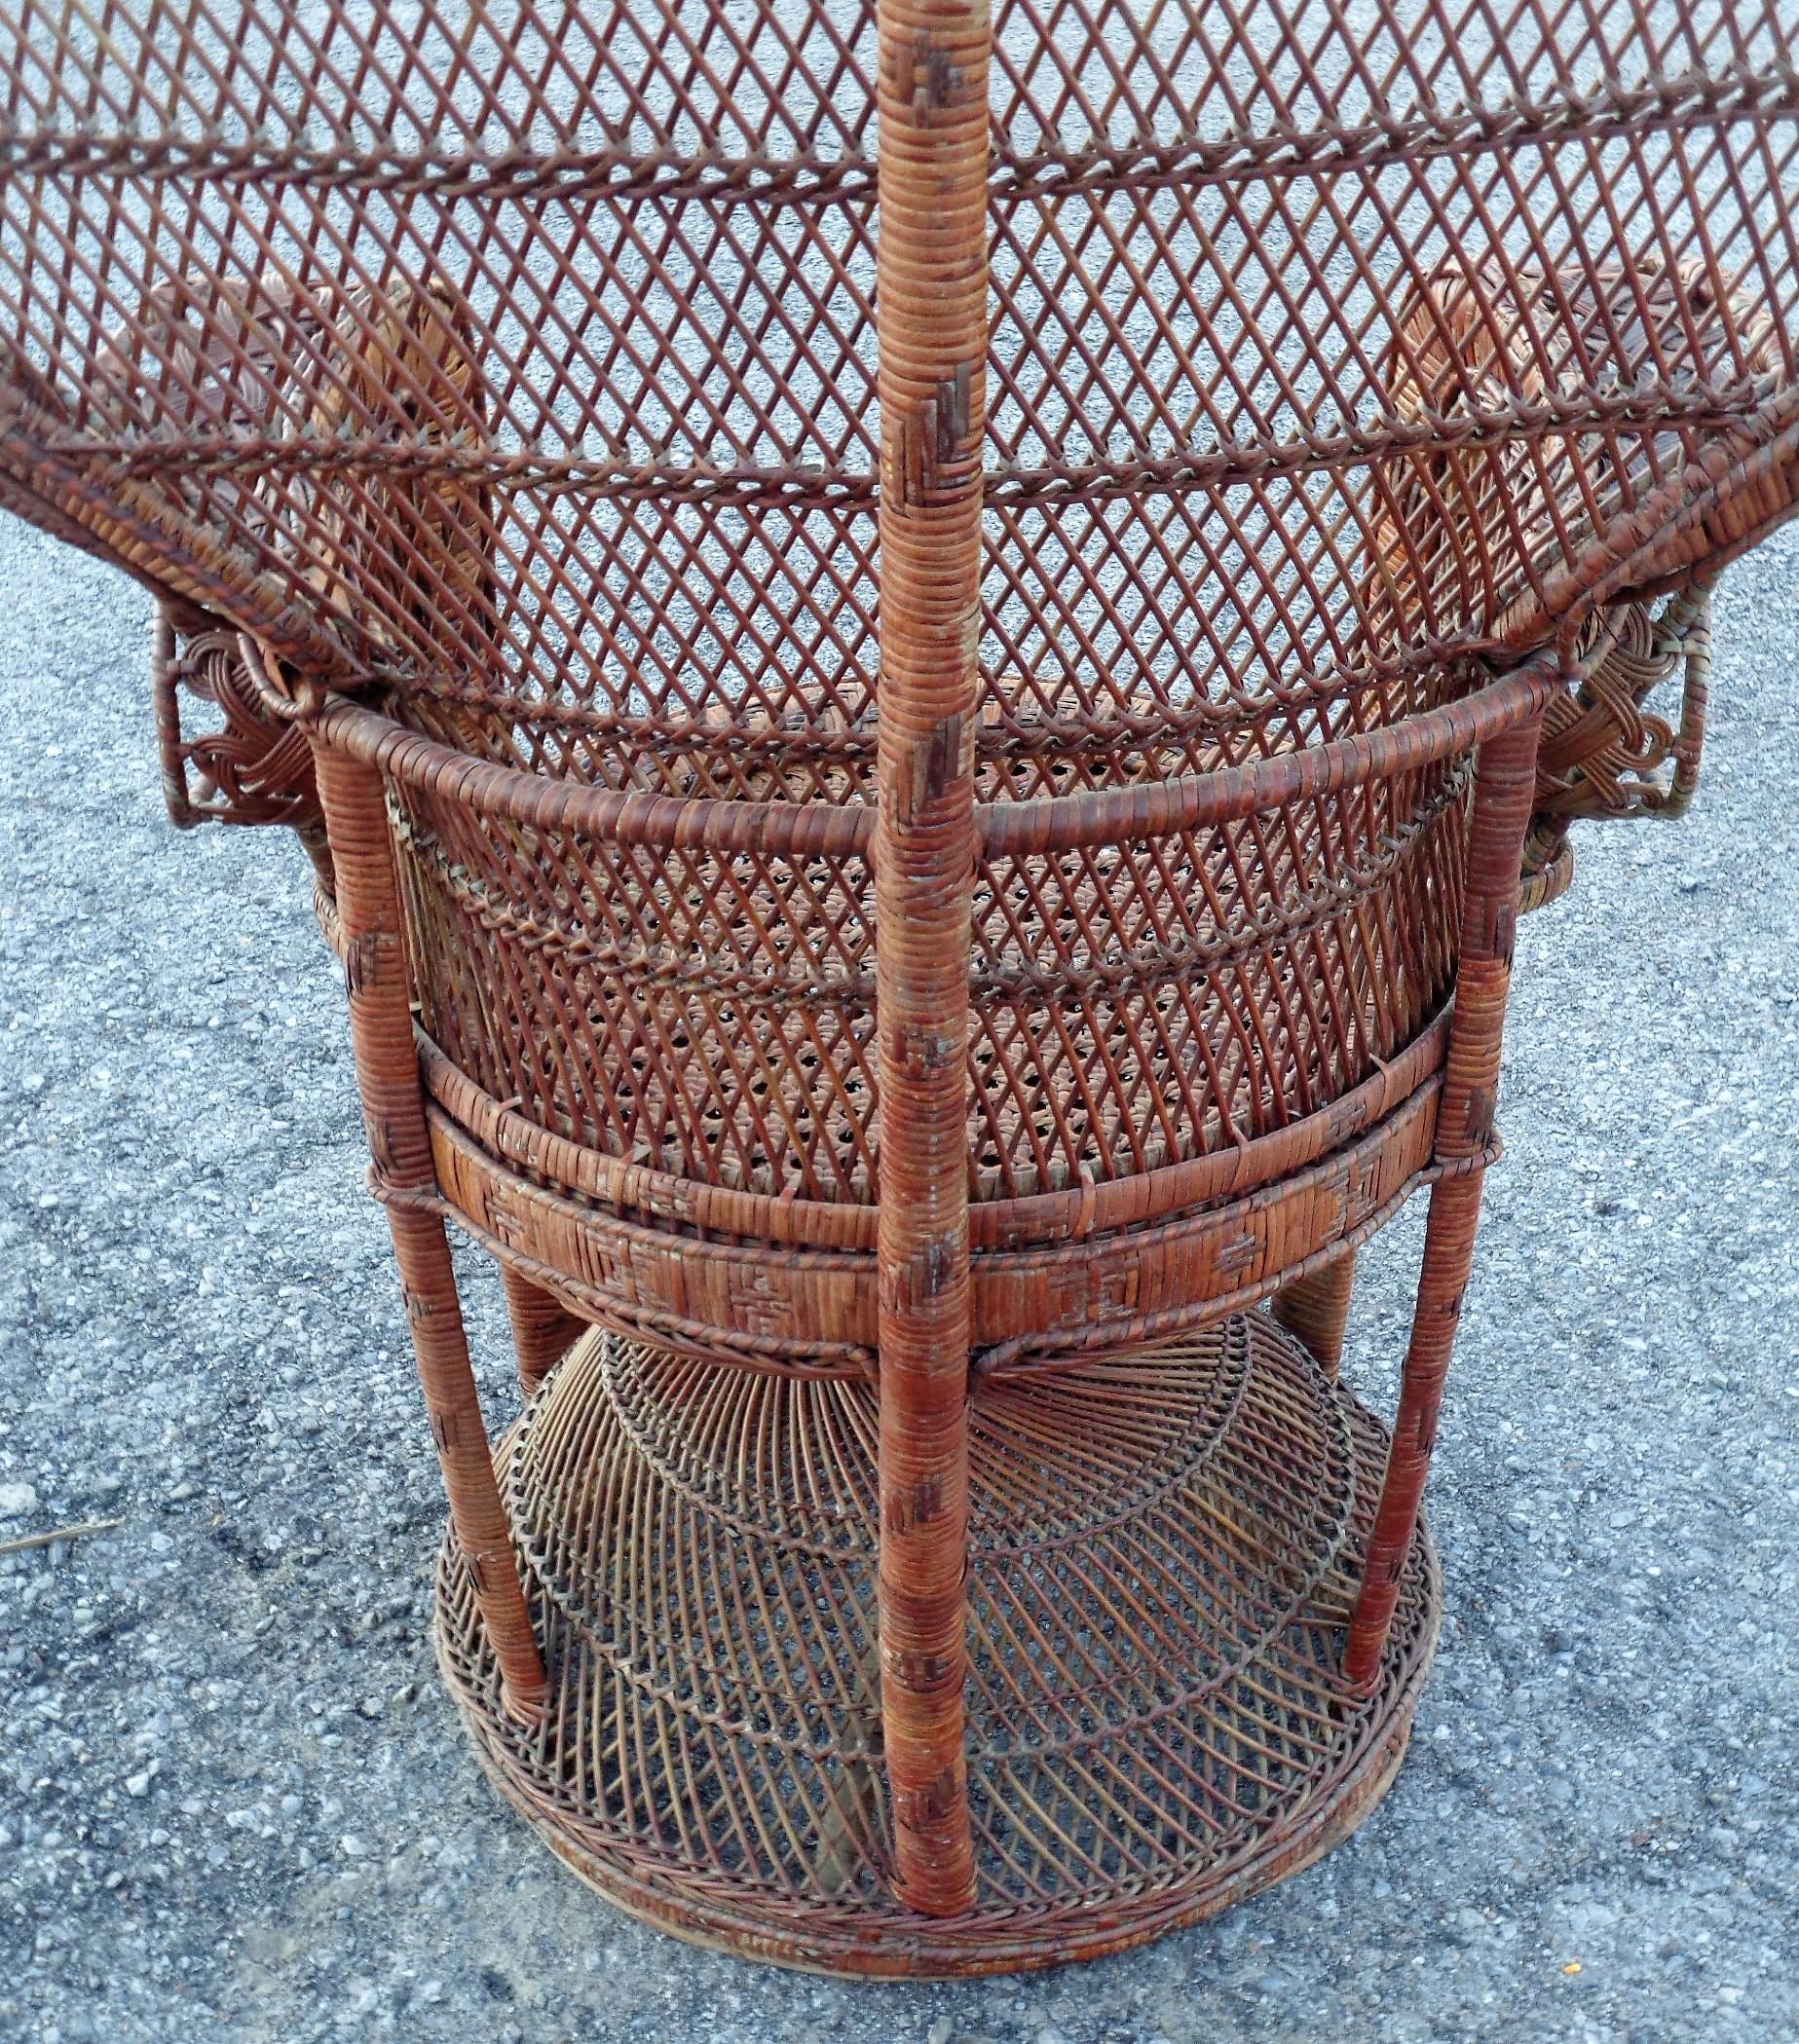 Wicker Rattan Emmanuelle Peacock Chair In Good Condition For Sale In Rochester, NY